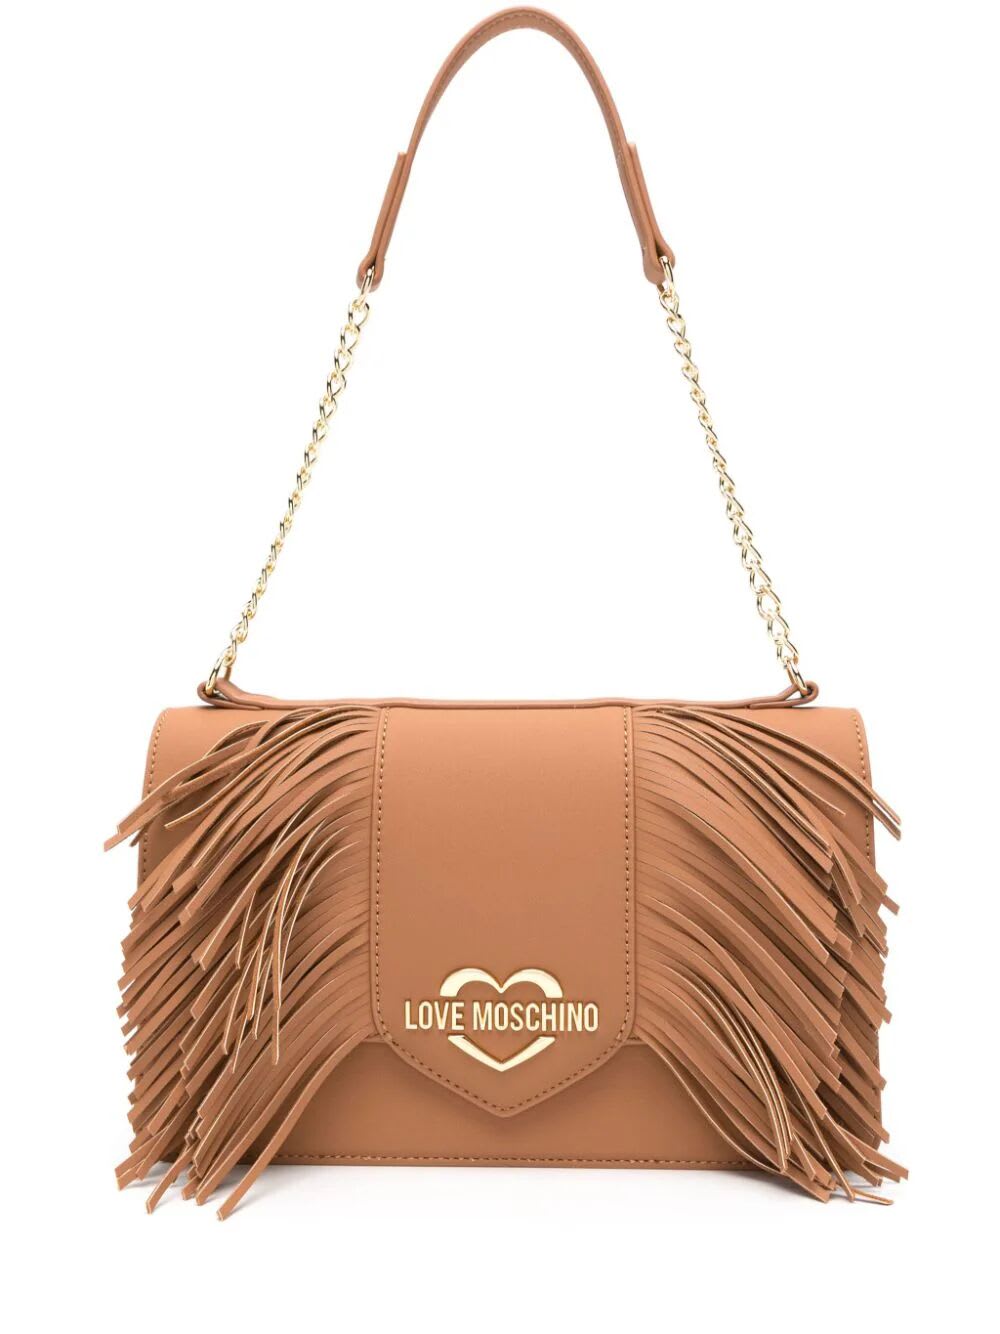 Love Moschino New Shiny Quitled Shoulder Bag In Camel